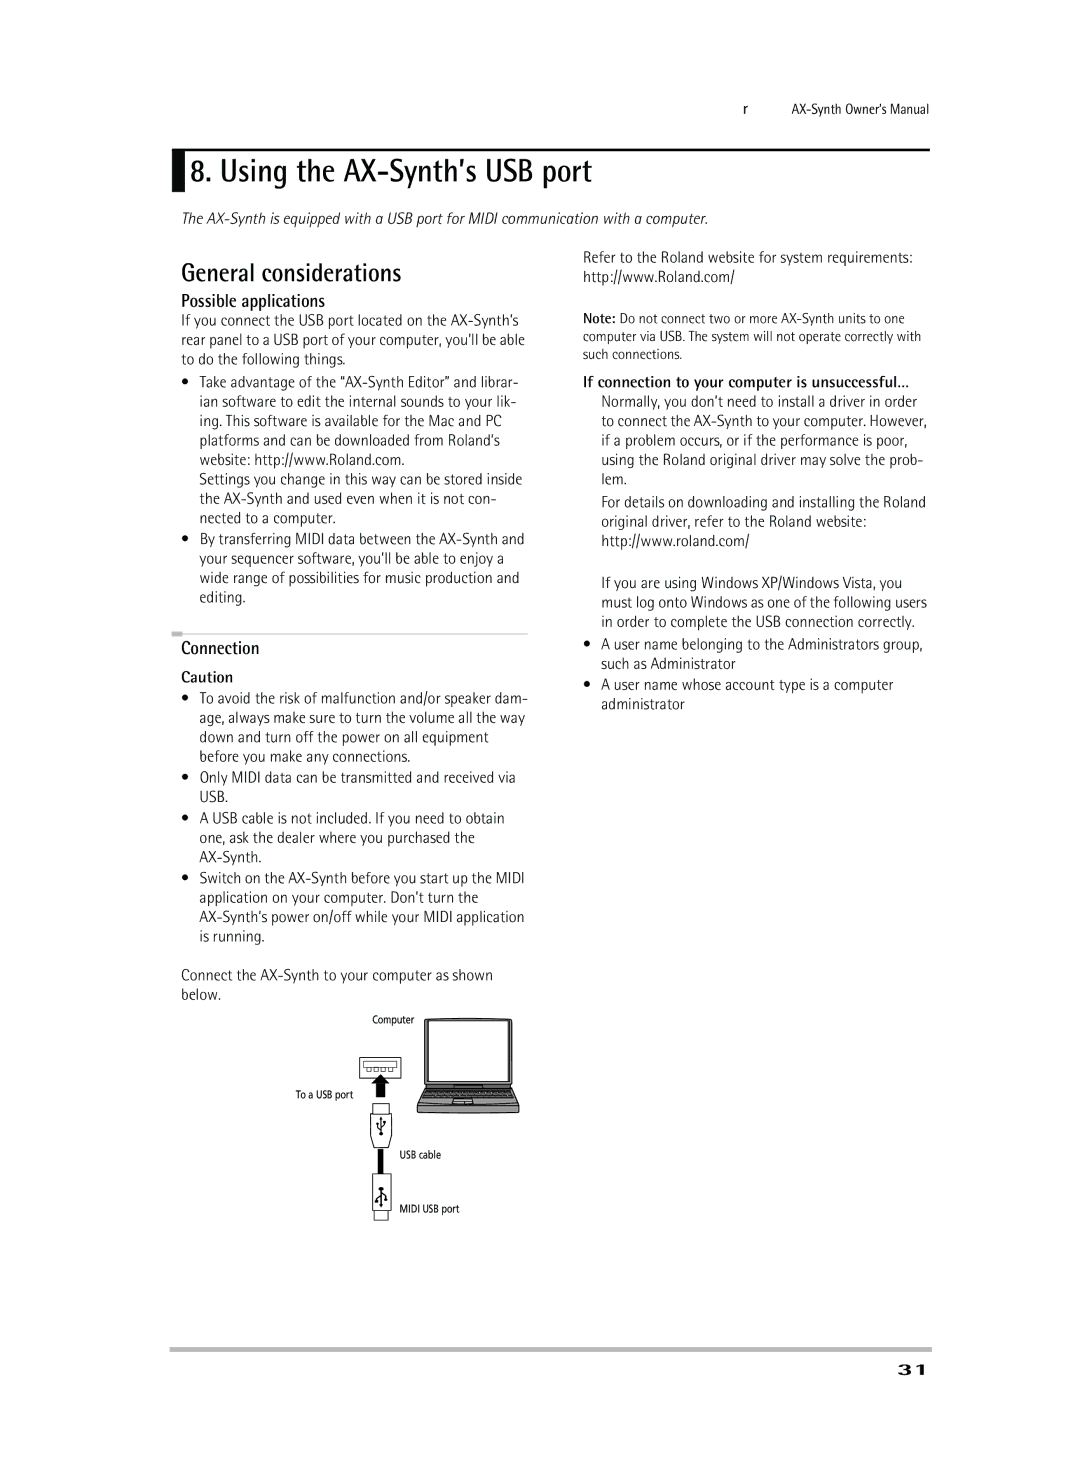 Roland owner manual Using the AX-Synth’s USB port, General considerations, Possible applications, Connection 